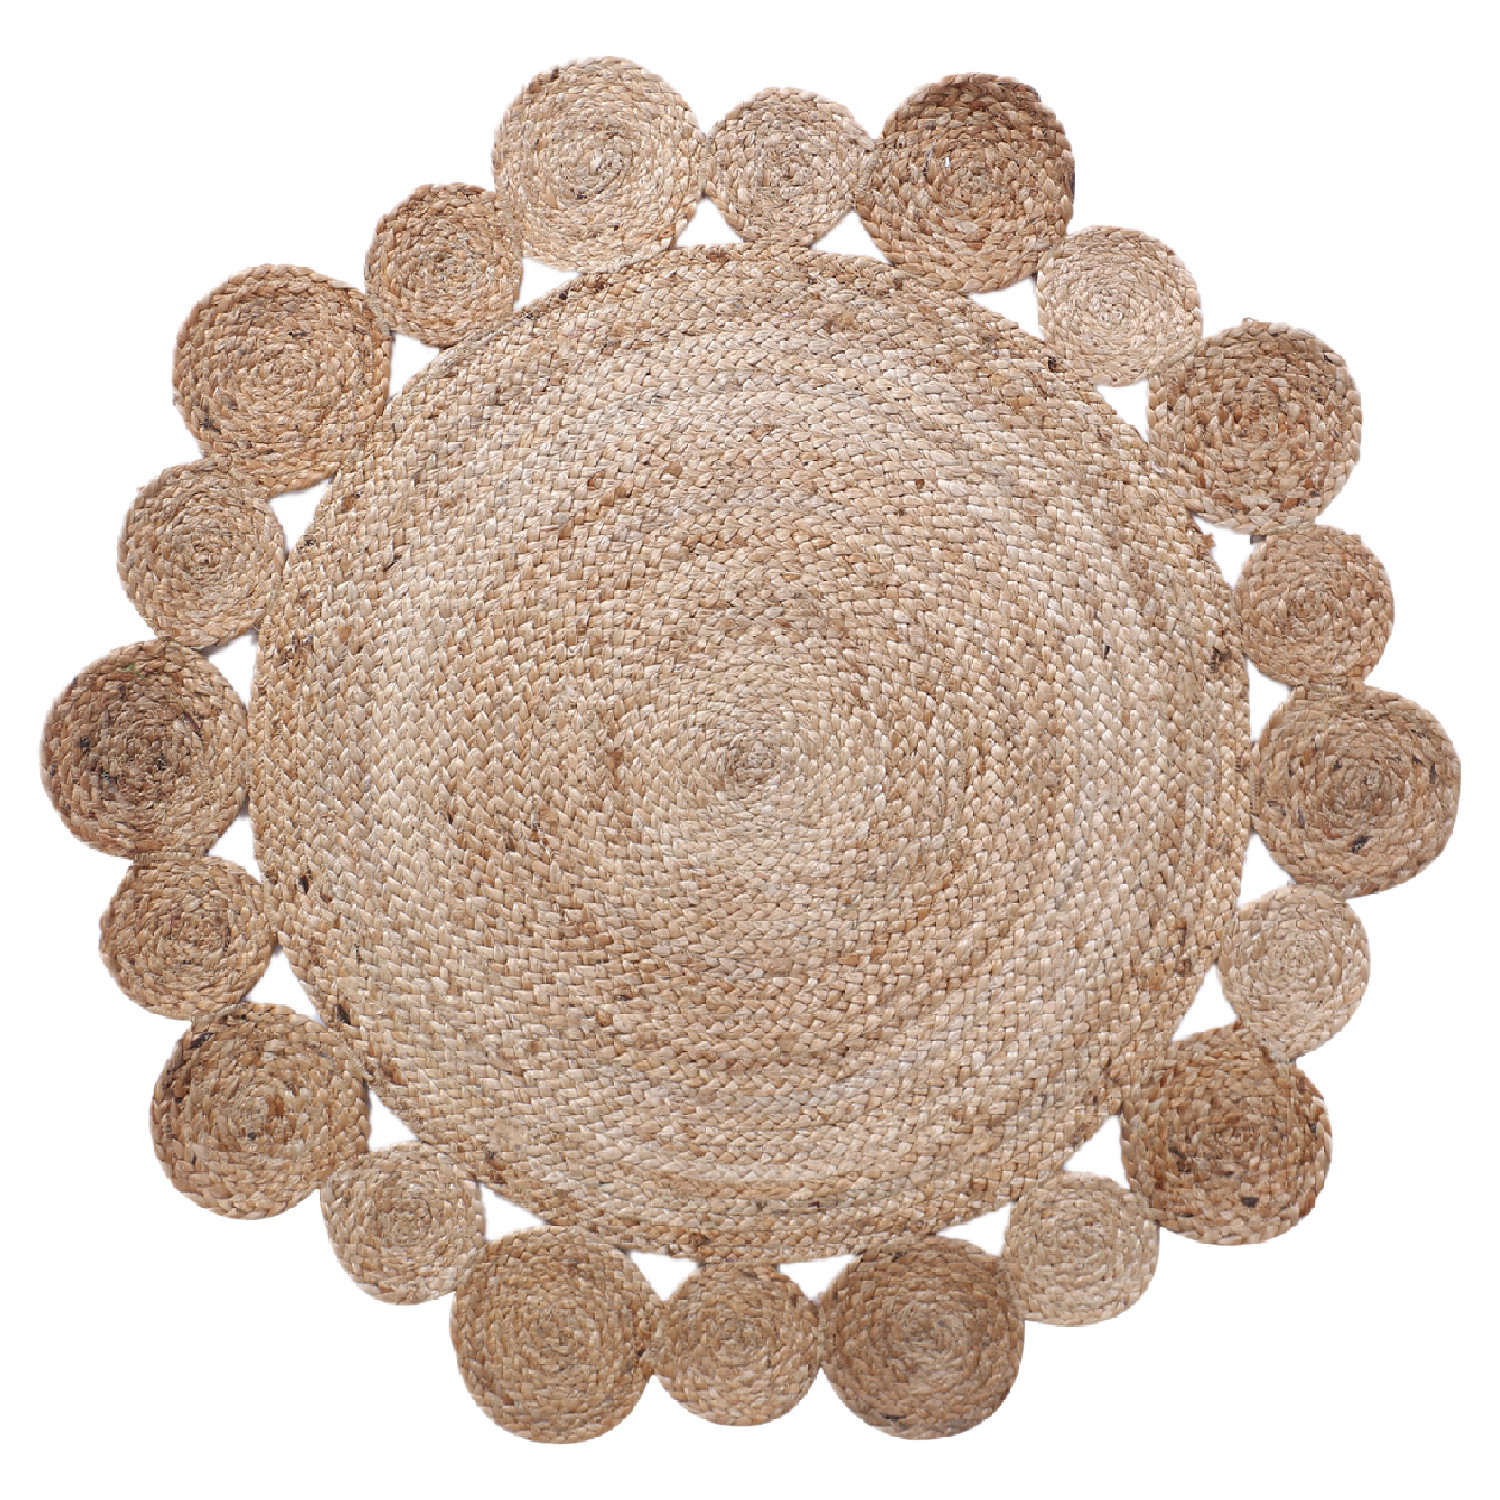 Kuber Industries Hand Woven Carpet Rugs|Natural Braided Jute Door mat|Multi Round Circle Mat For Bedroom,Living Room,Dining Room,Yoga,92x92 cm,(Brown)